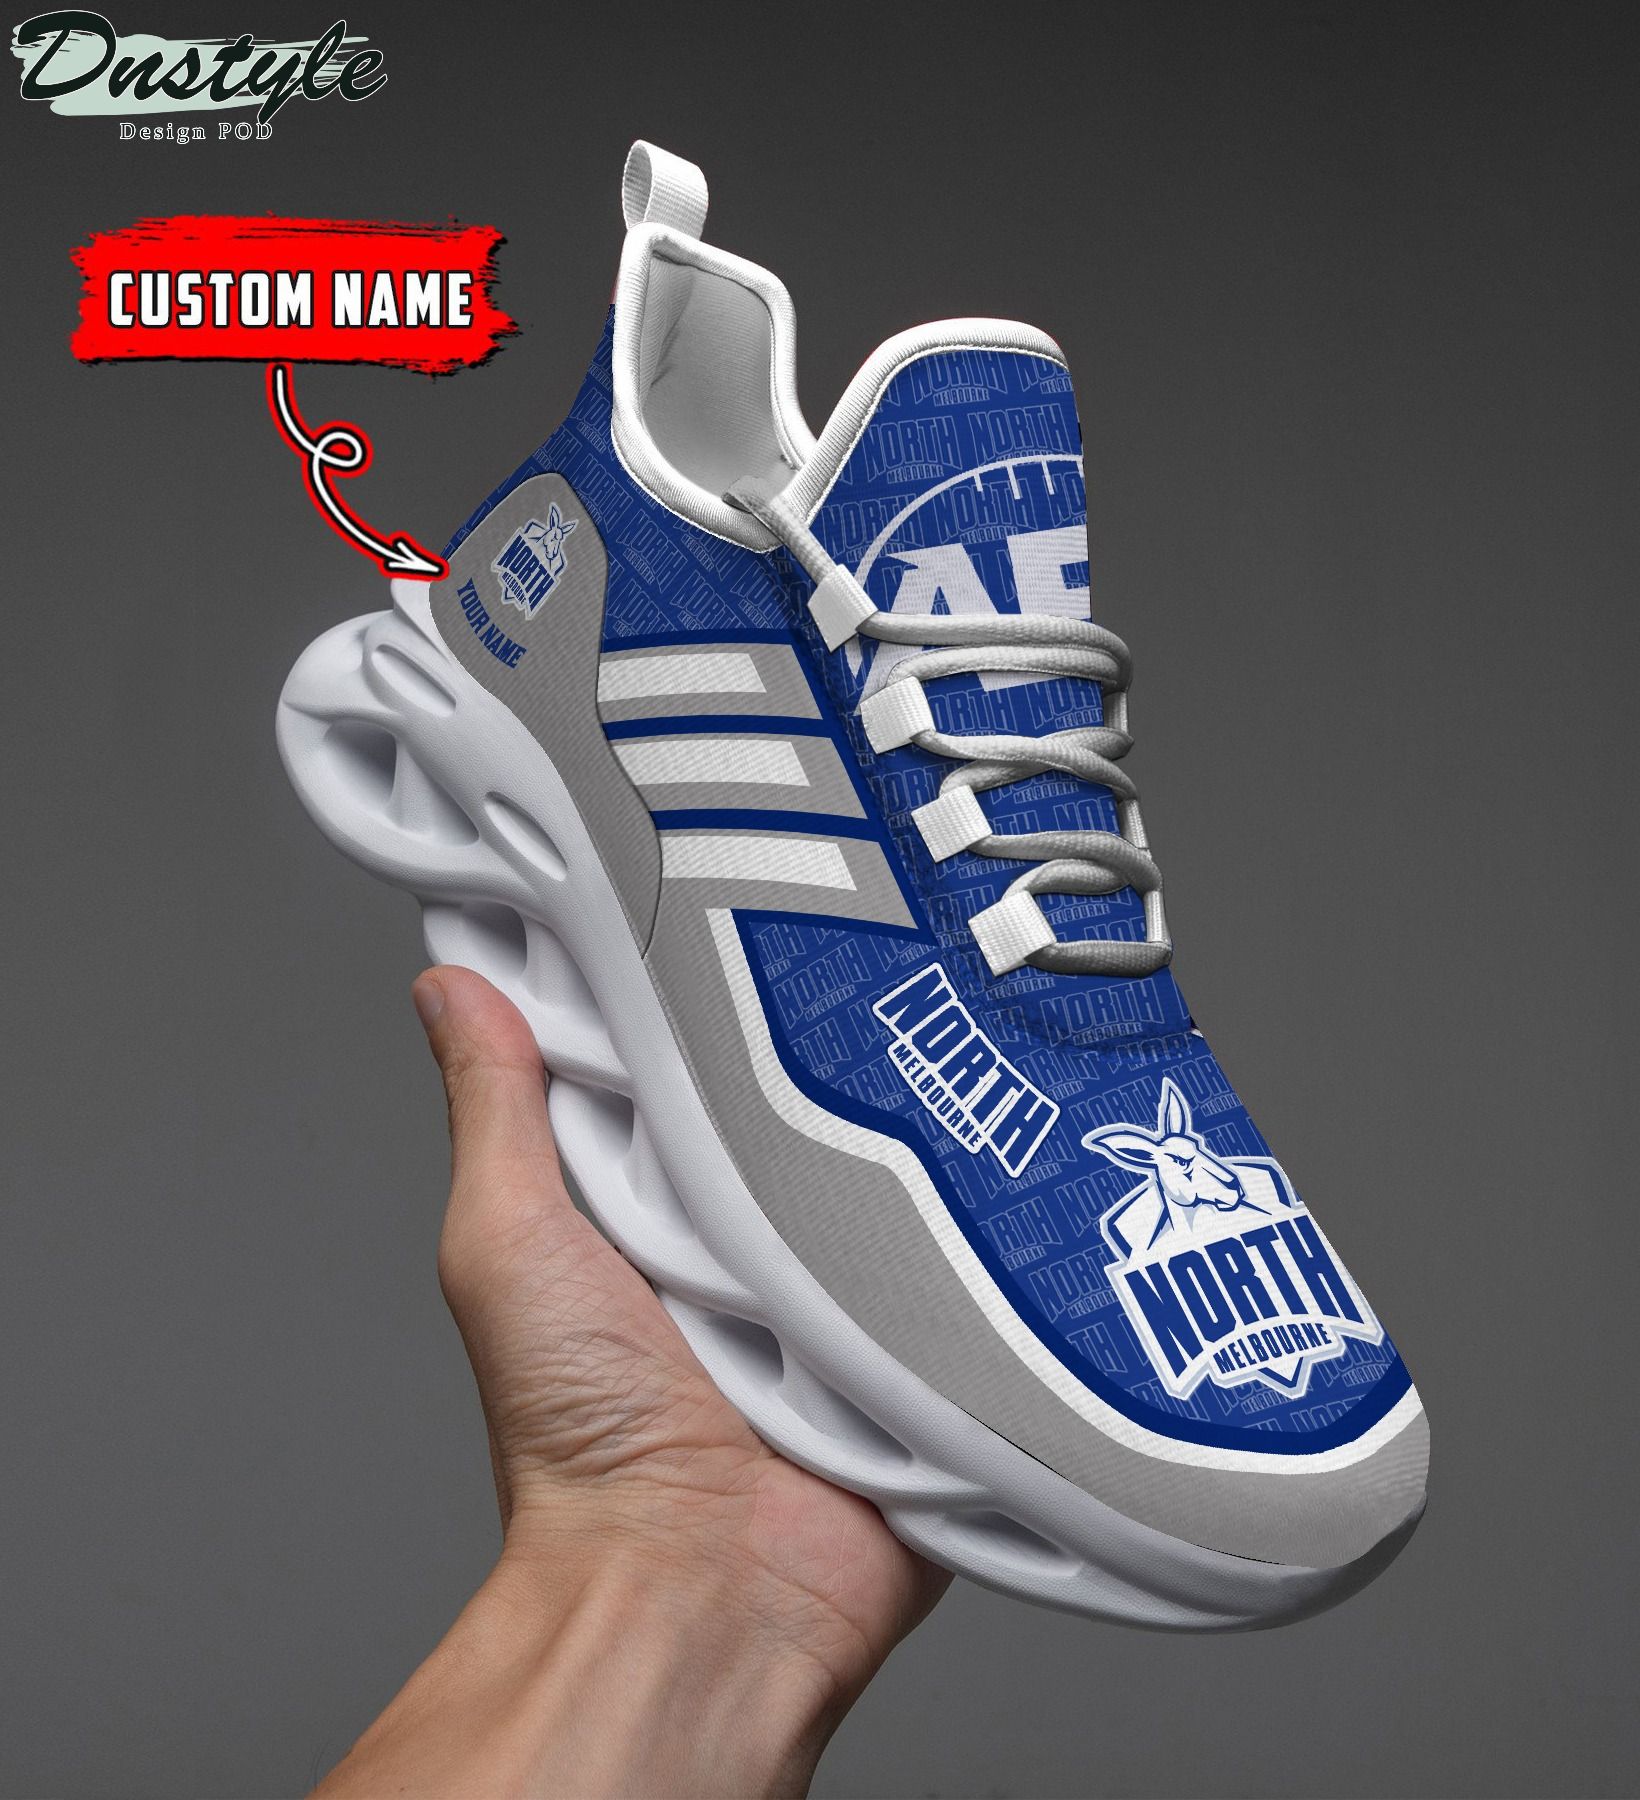 North Melbourne AFL personalized clunky max soul shoes